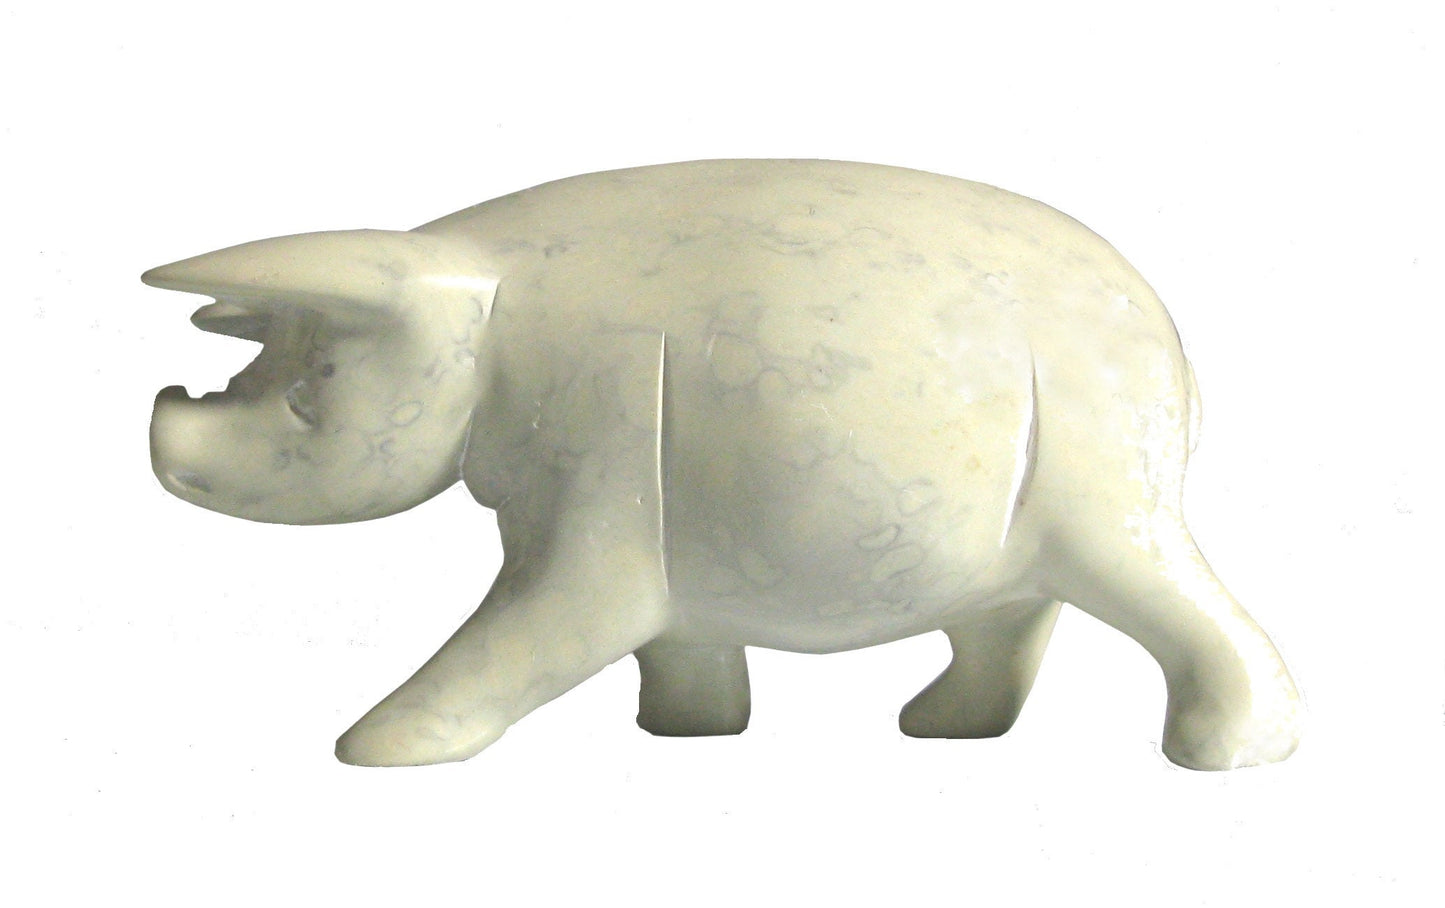 Stone Piglet Sculpture 10cm / 4 inch in White Gift Box with Story-card